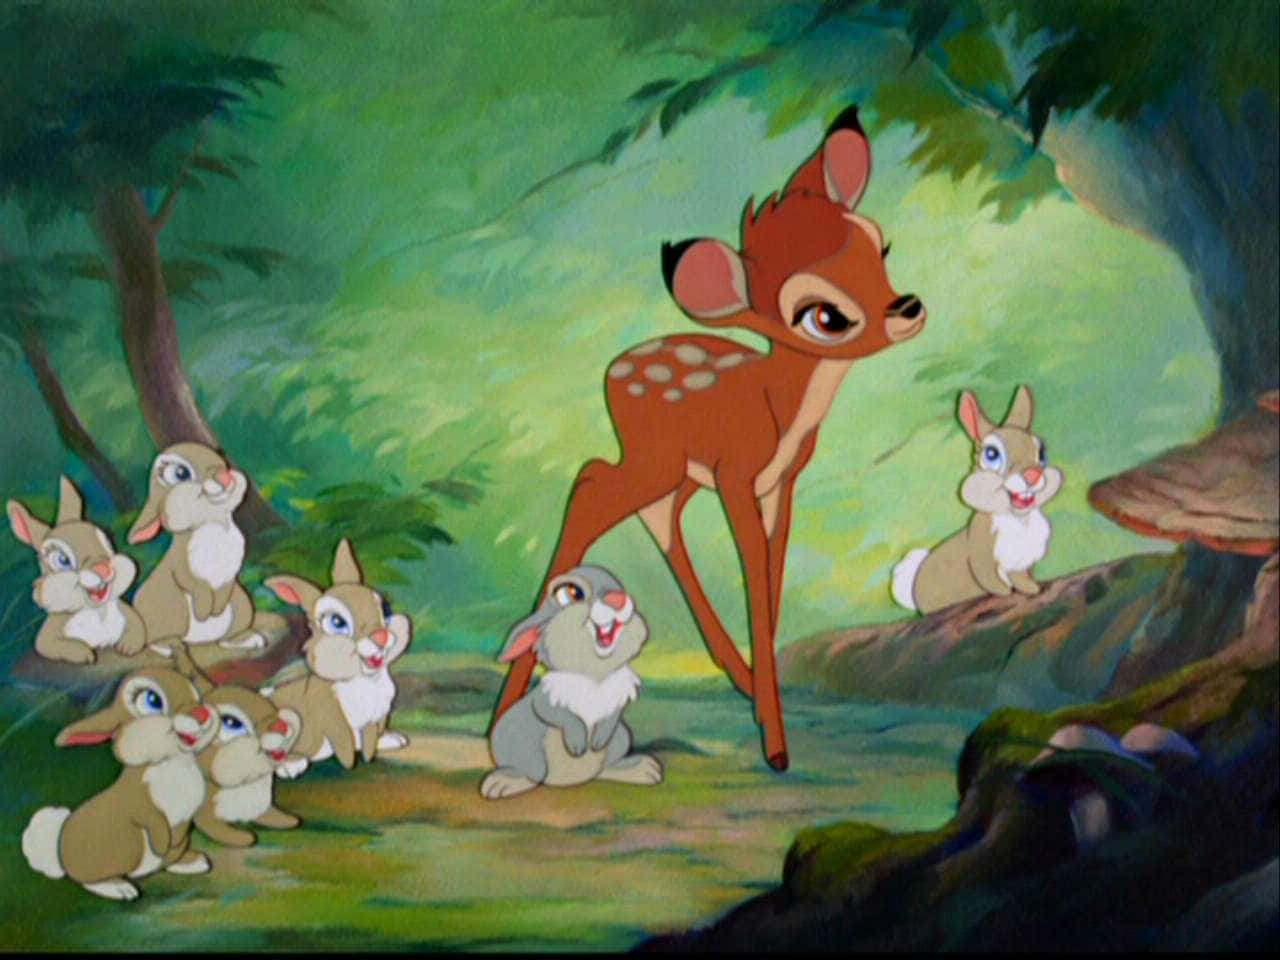 Bambi looks up in wonder at the beauty of the forest.